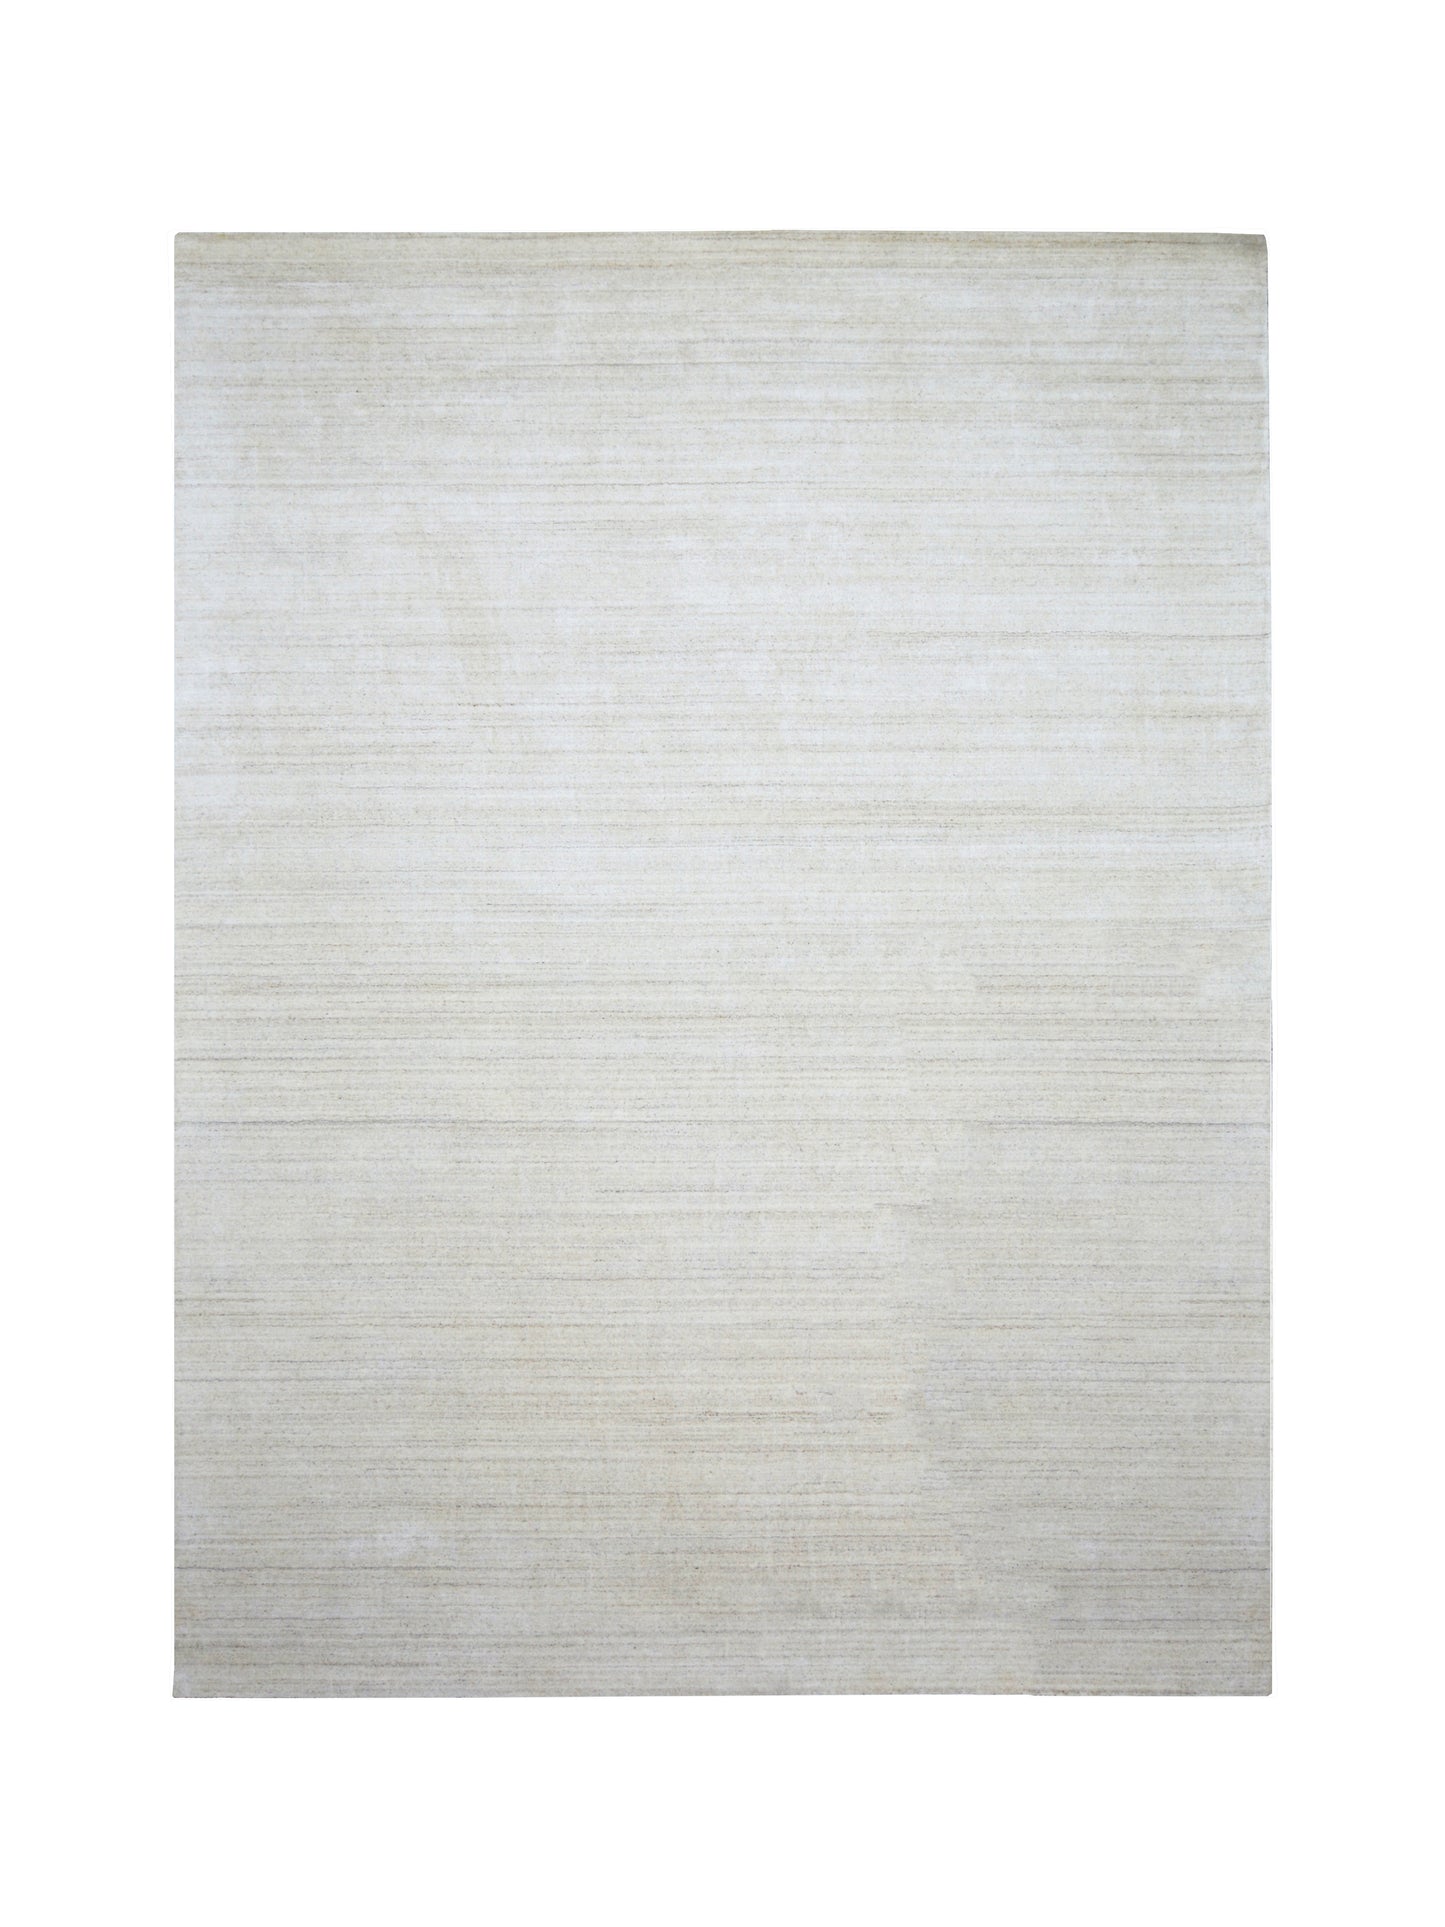 Ivory, High Shine,, Plush Pile, Viscose and Wool Blended, Modern Solid Handloom Area Rug